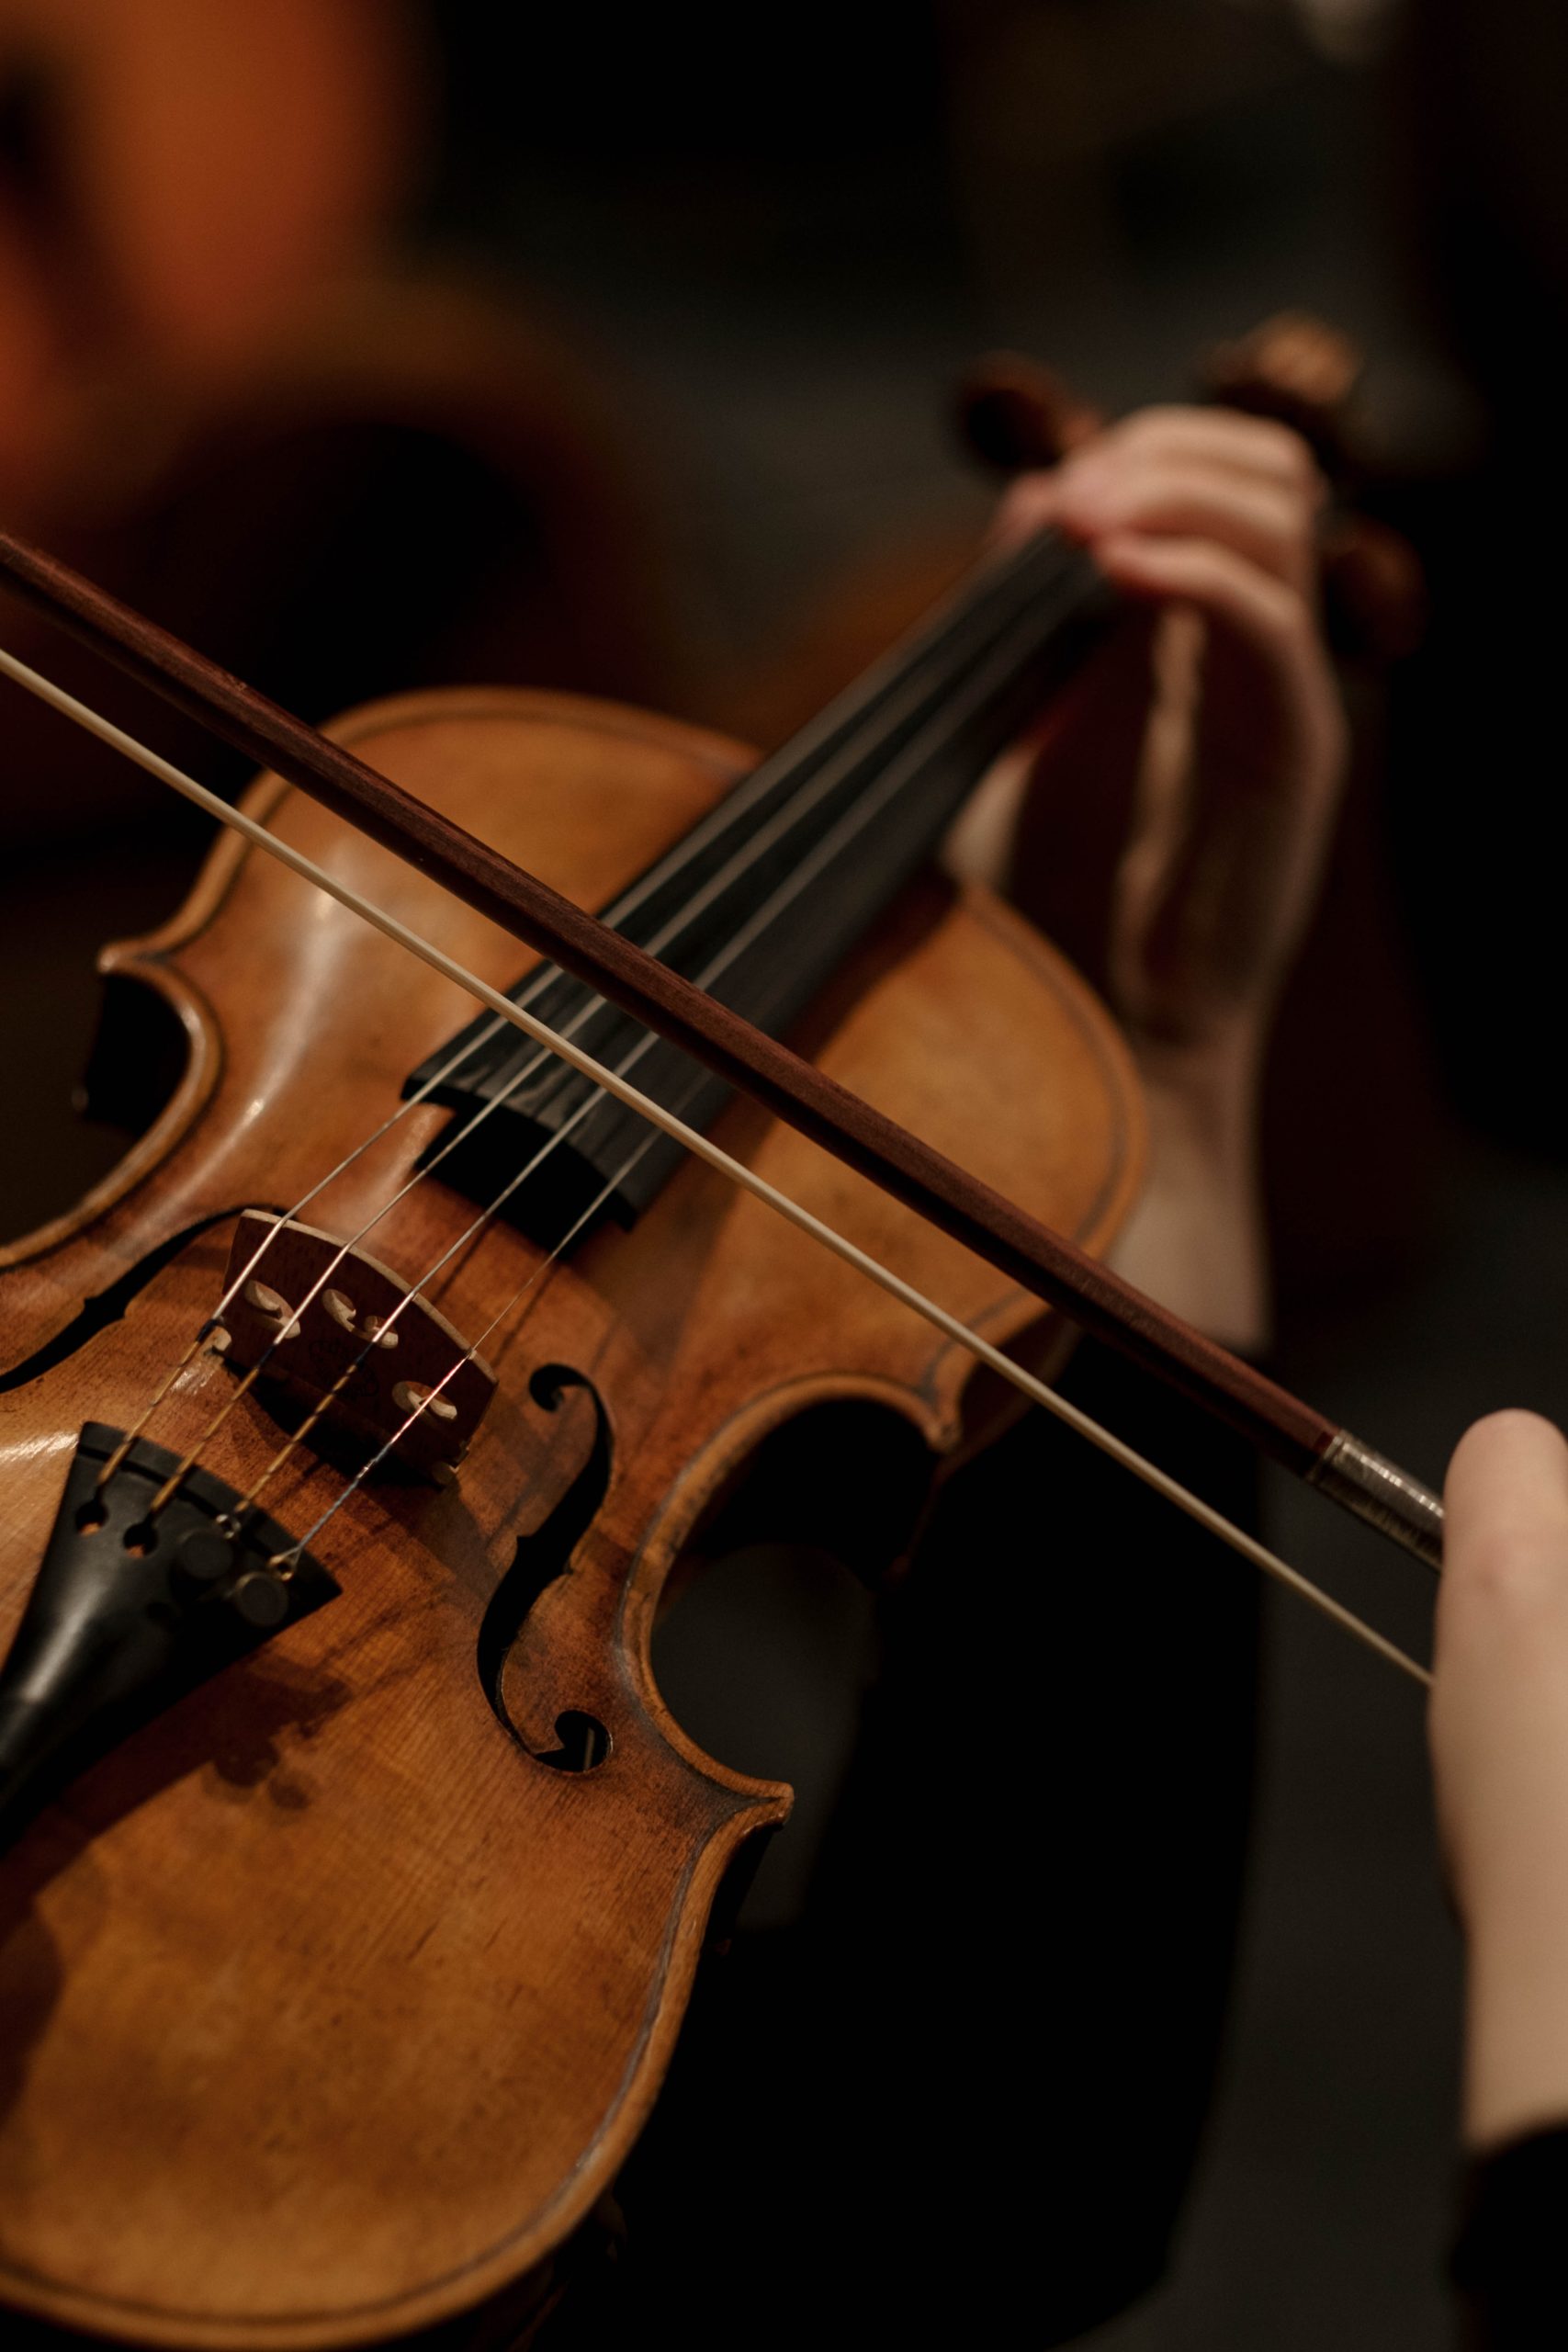 Close up of violonist's hands on the violin playing